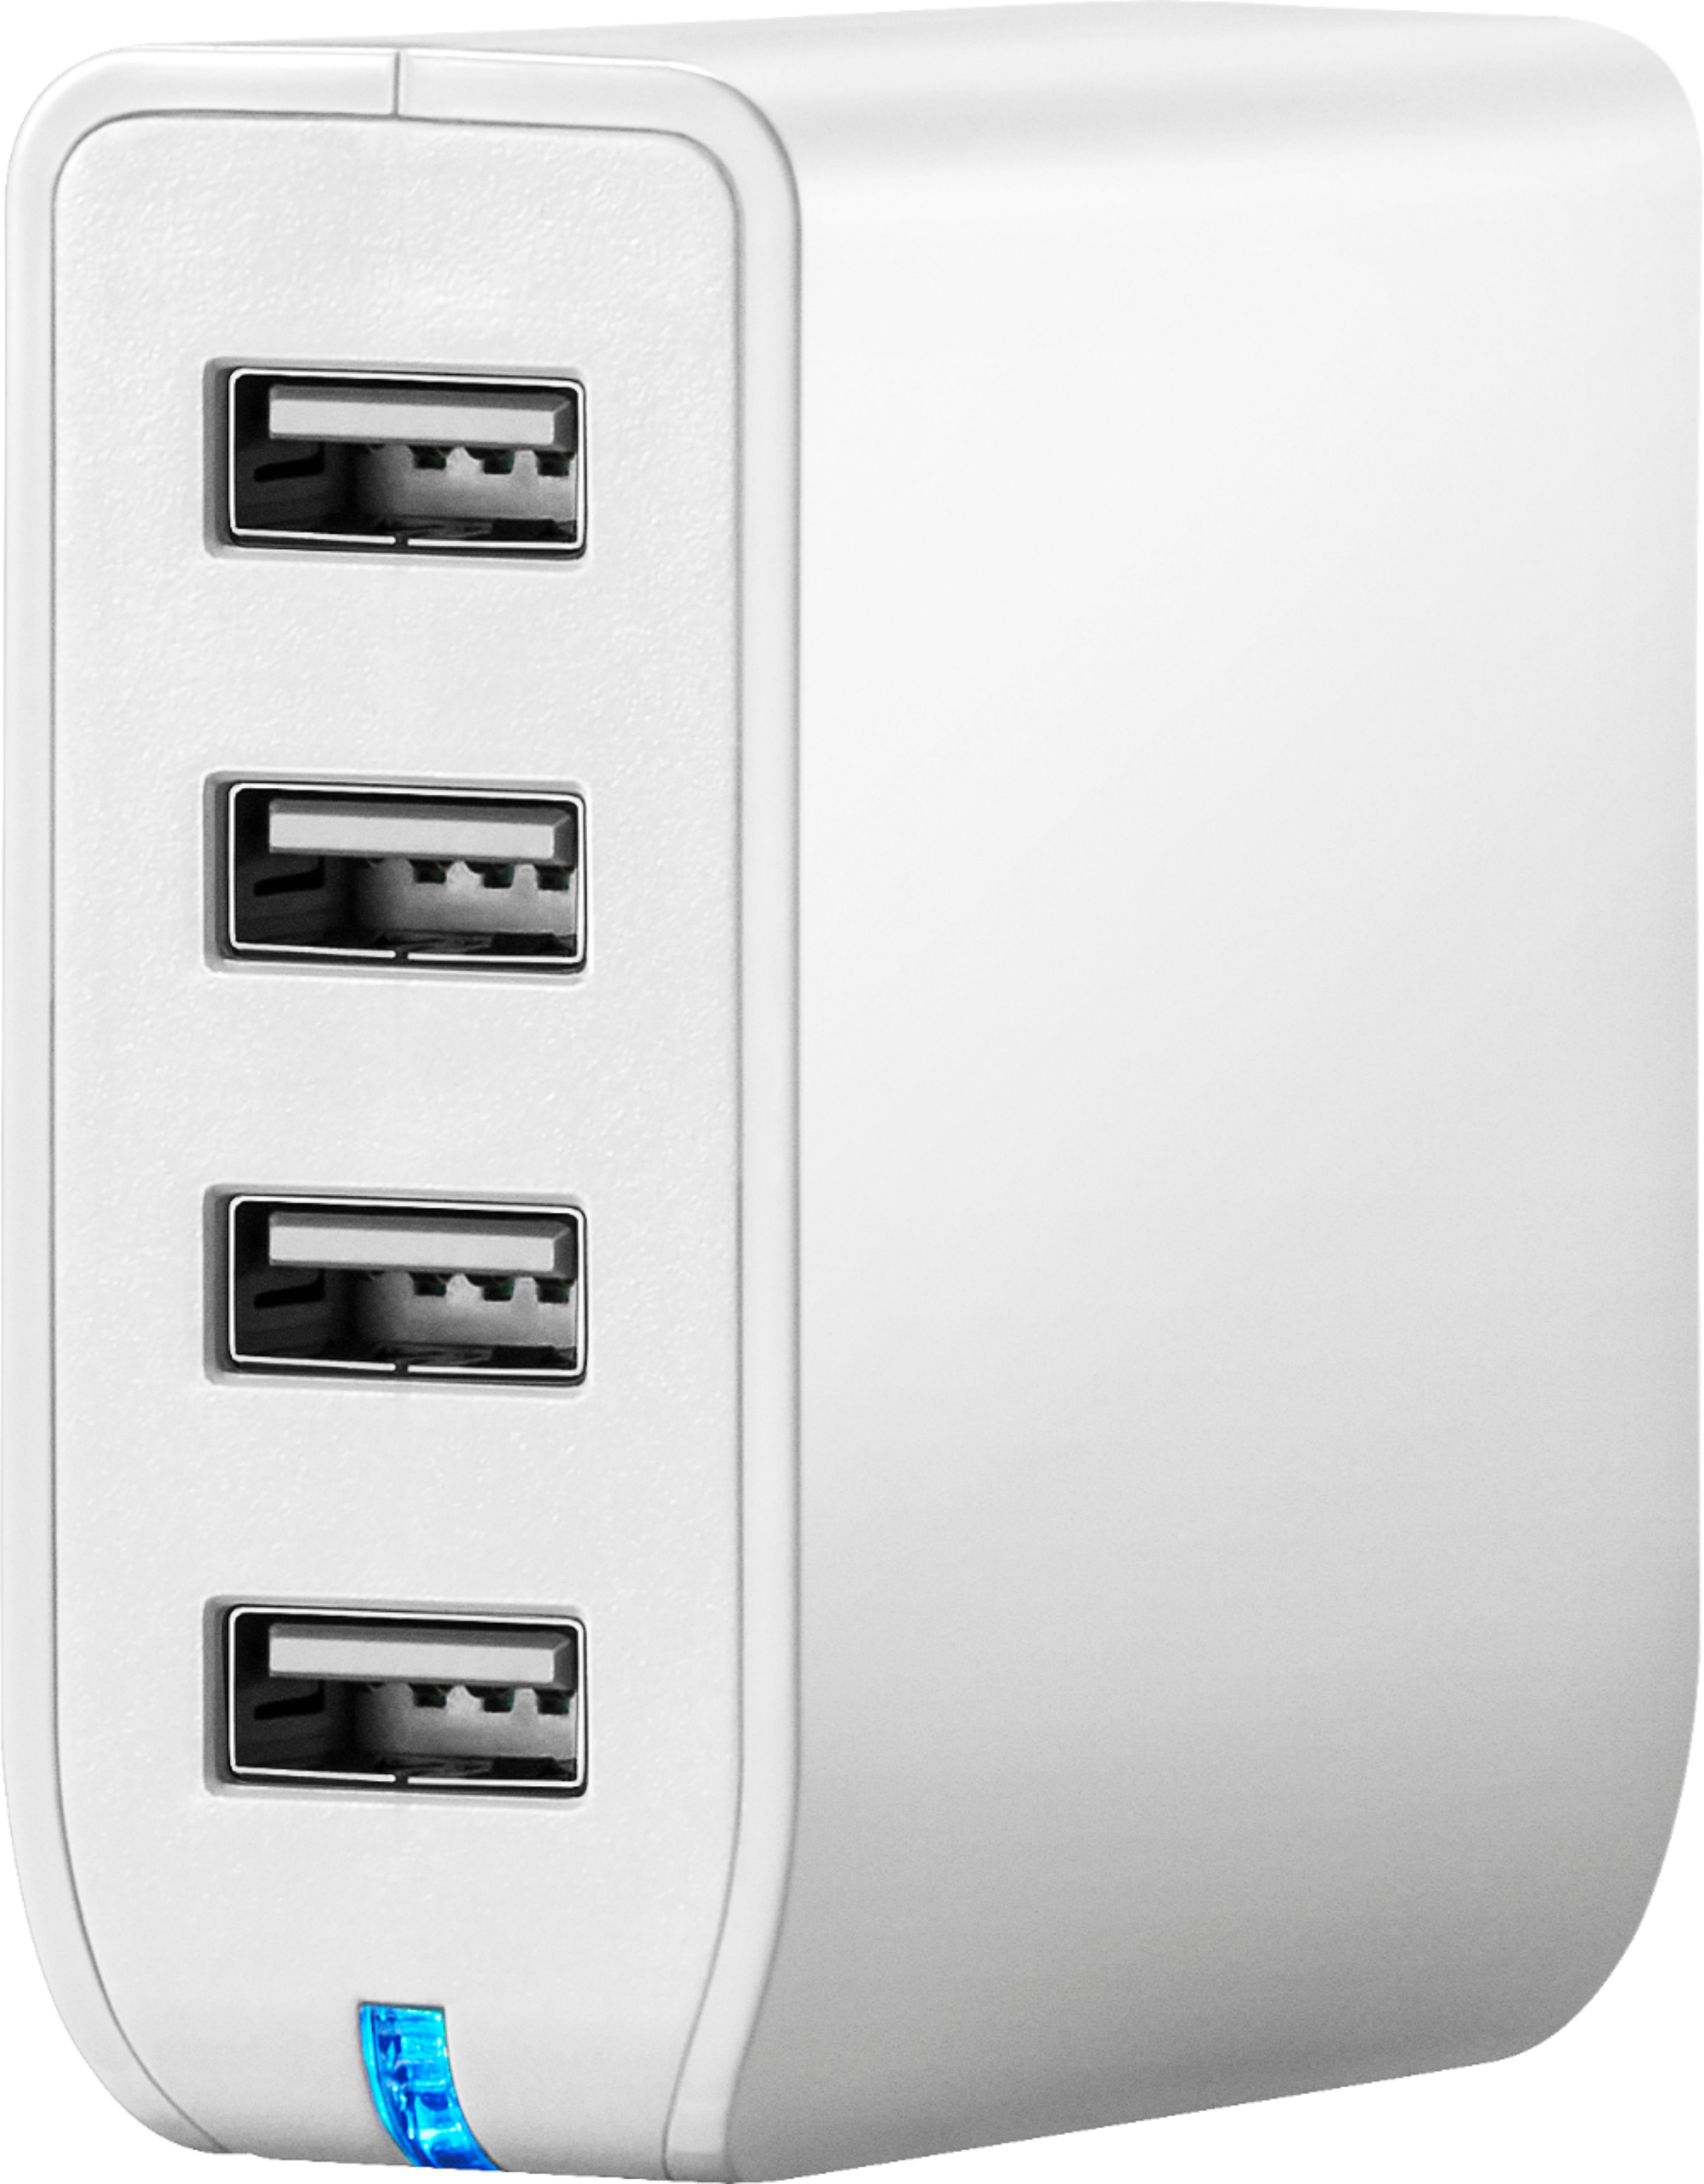 Insignia™ 4-Port USB Wall Charger White Best Buy